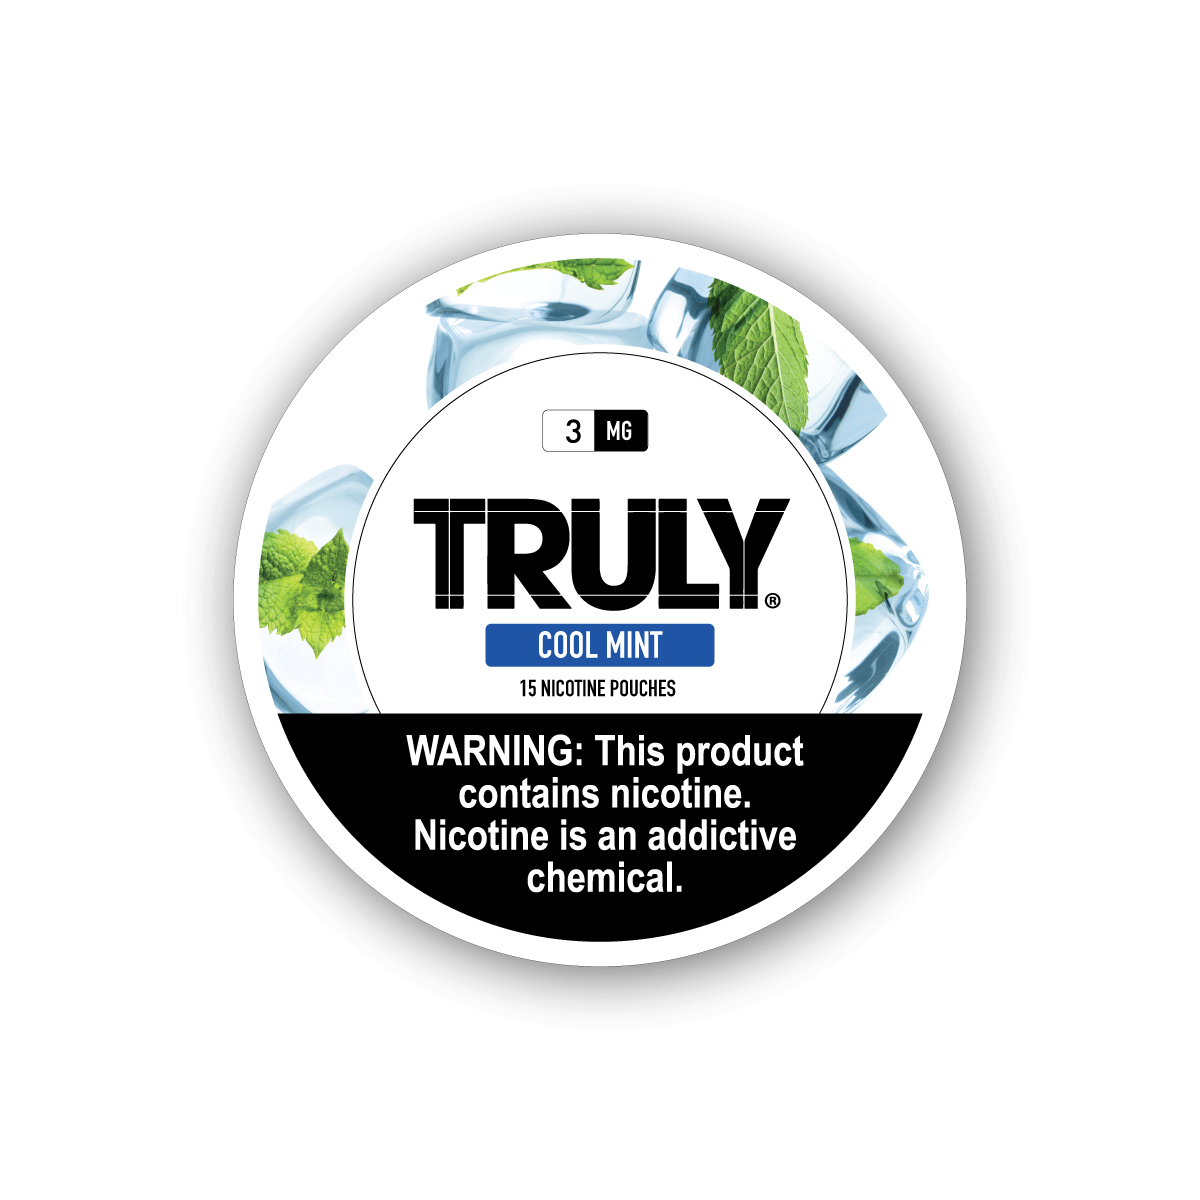 TRULY COOL MINT NICOTINE POUCHES (15 COUNT)